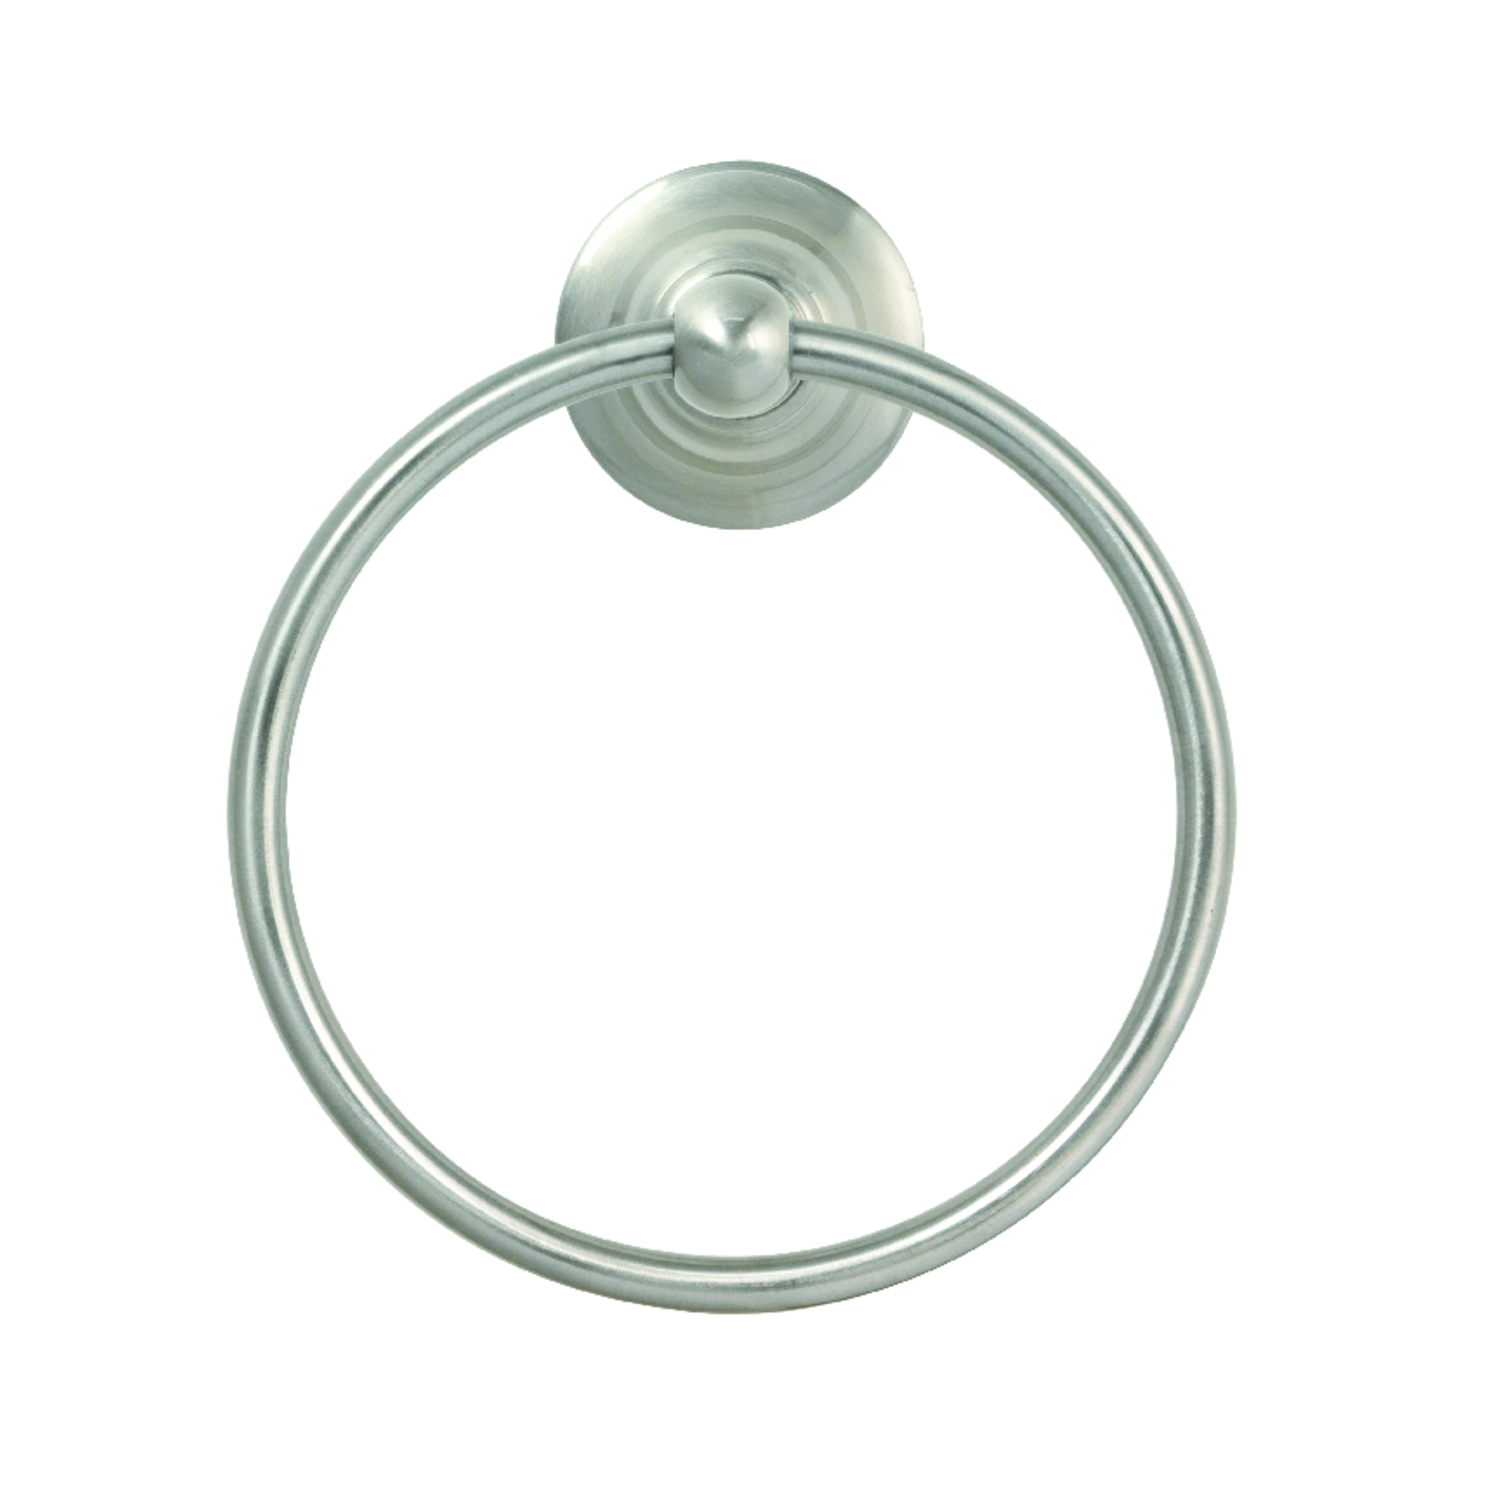 Photos - Other interior and decor Moen Sage Brushed Nickel Towel Ring Brass DN6886BN 